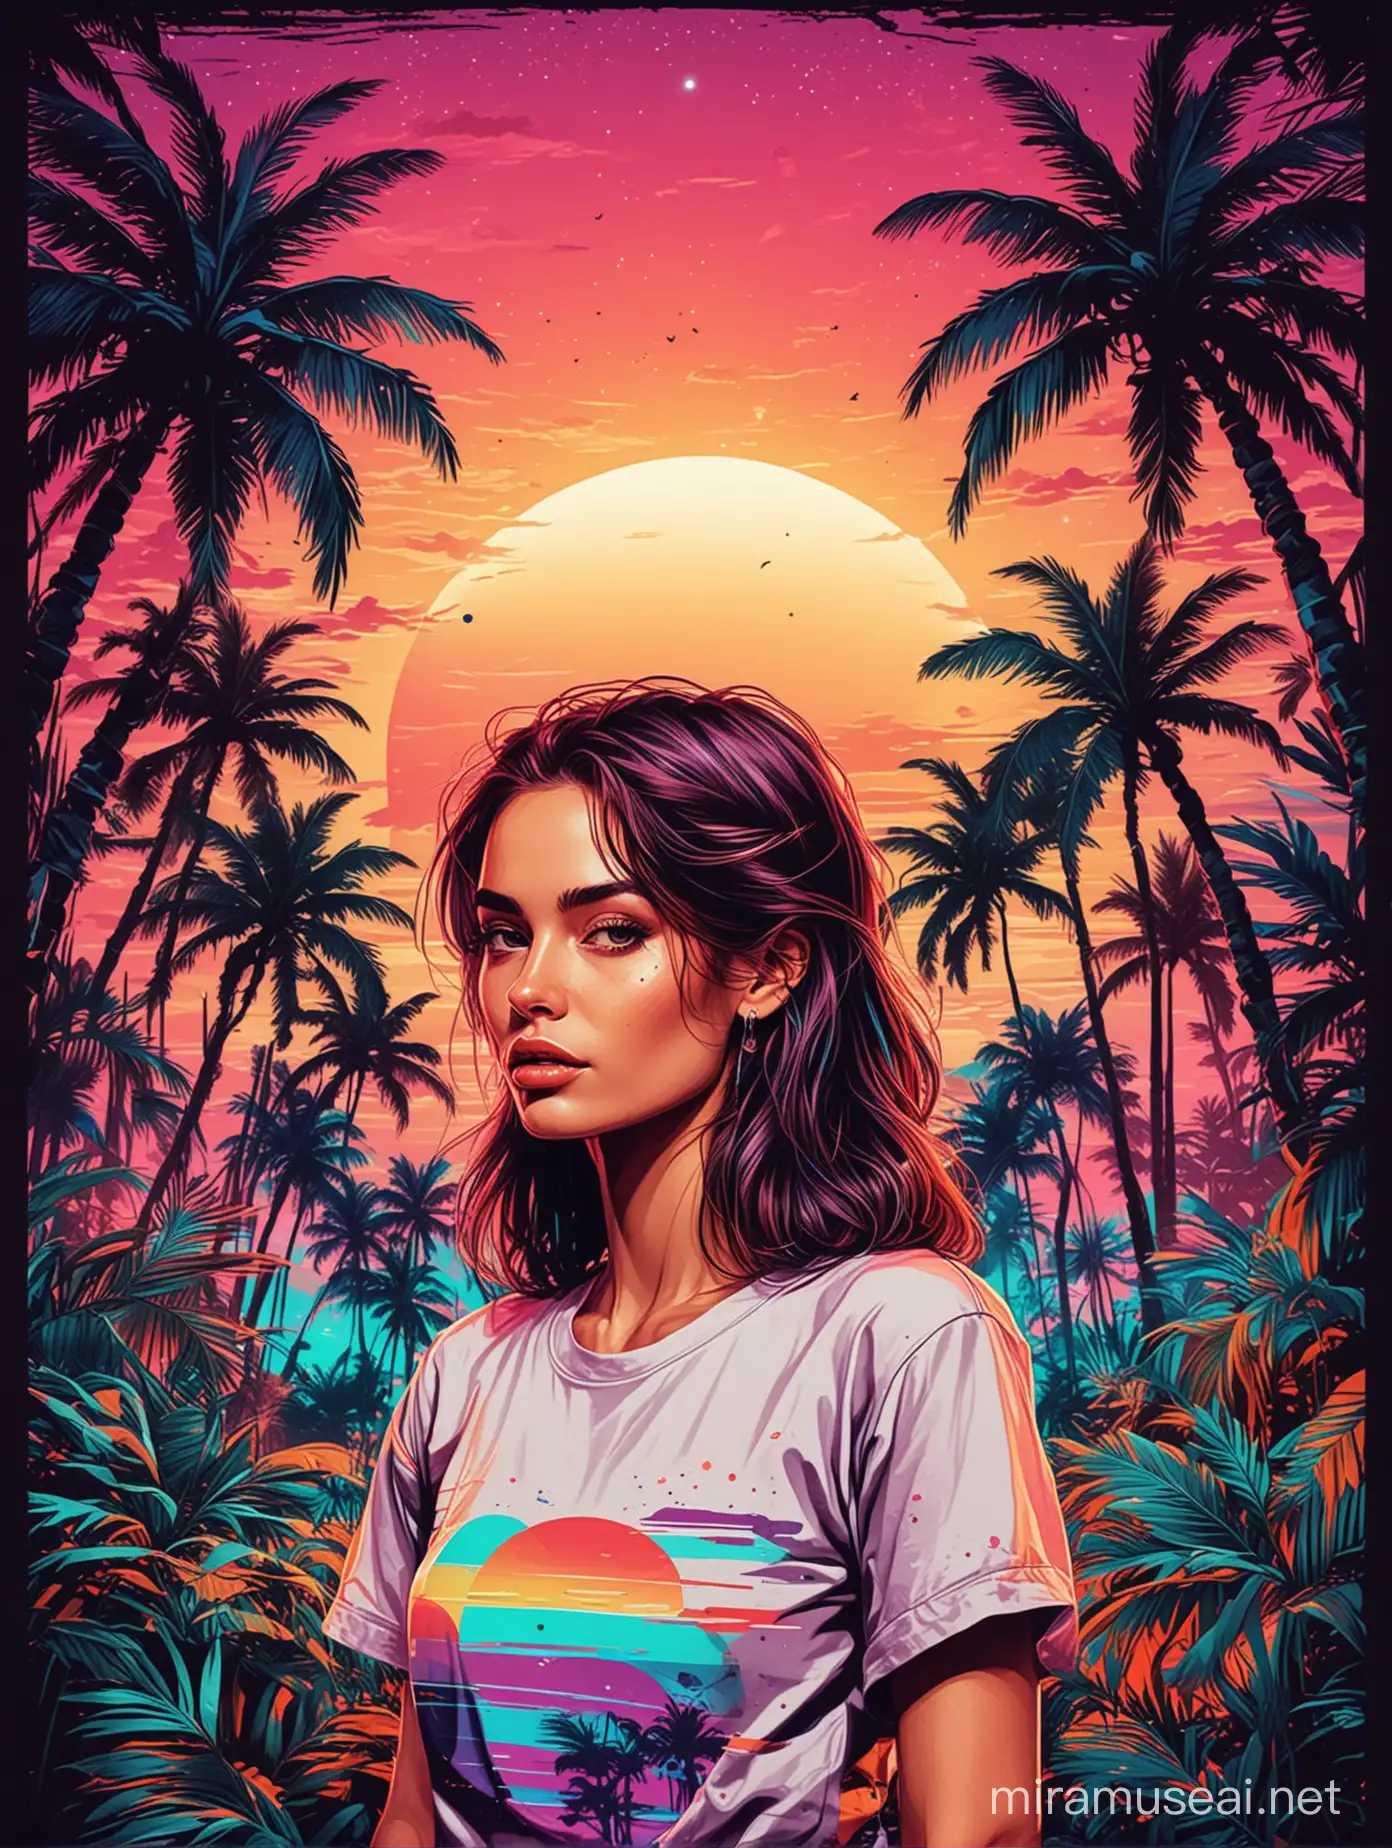 Detailed vector illustration, with palm trees, tropical foliage, colorful sky with visible planets in the background, high contrast colors, bright neon lighting and bold outlines in t-shirt graphic, a woman